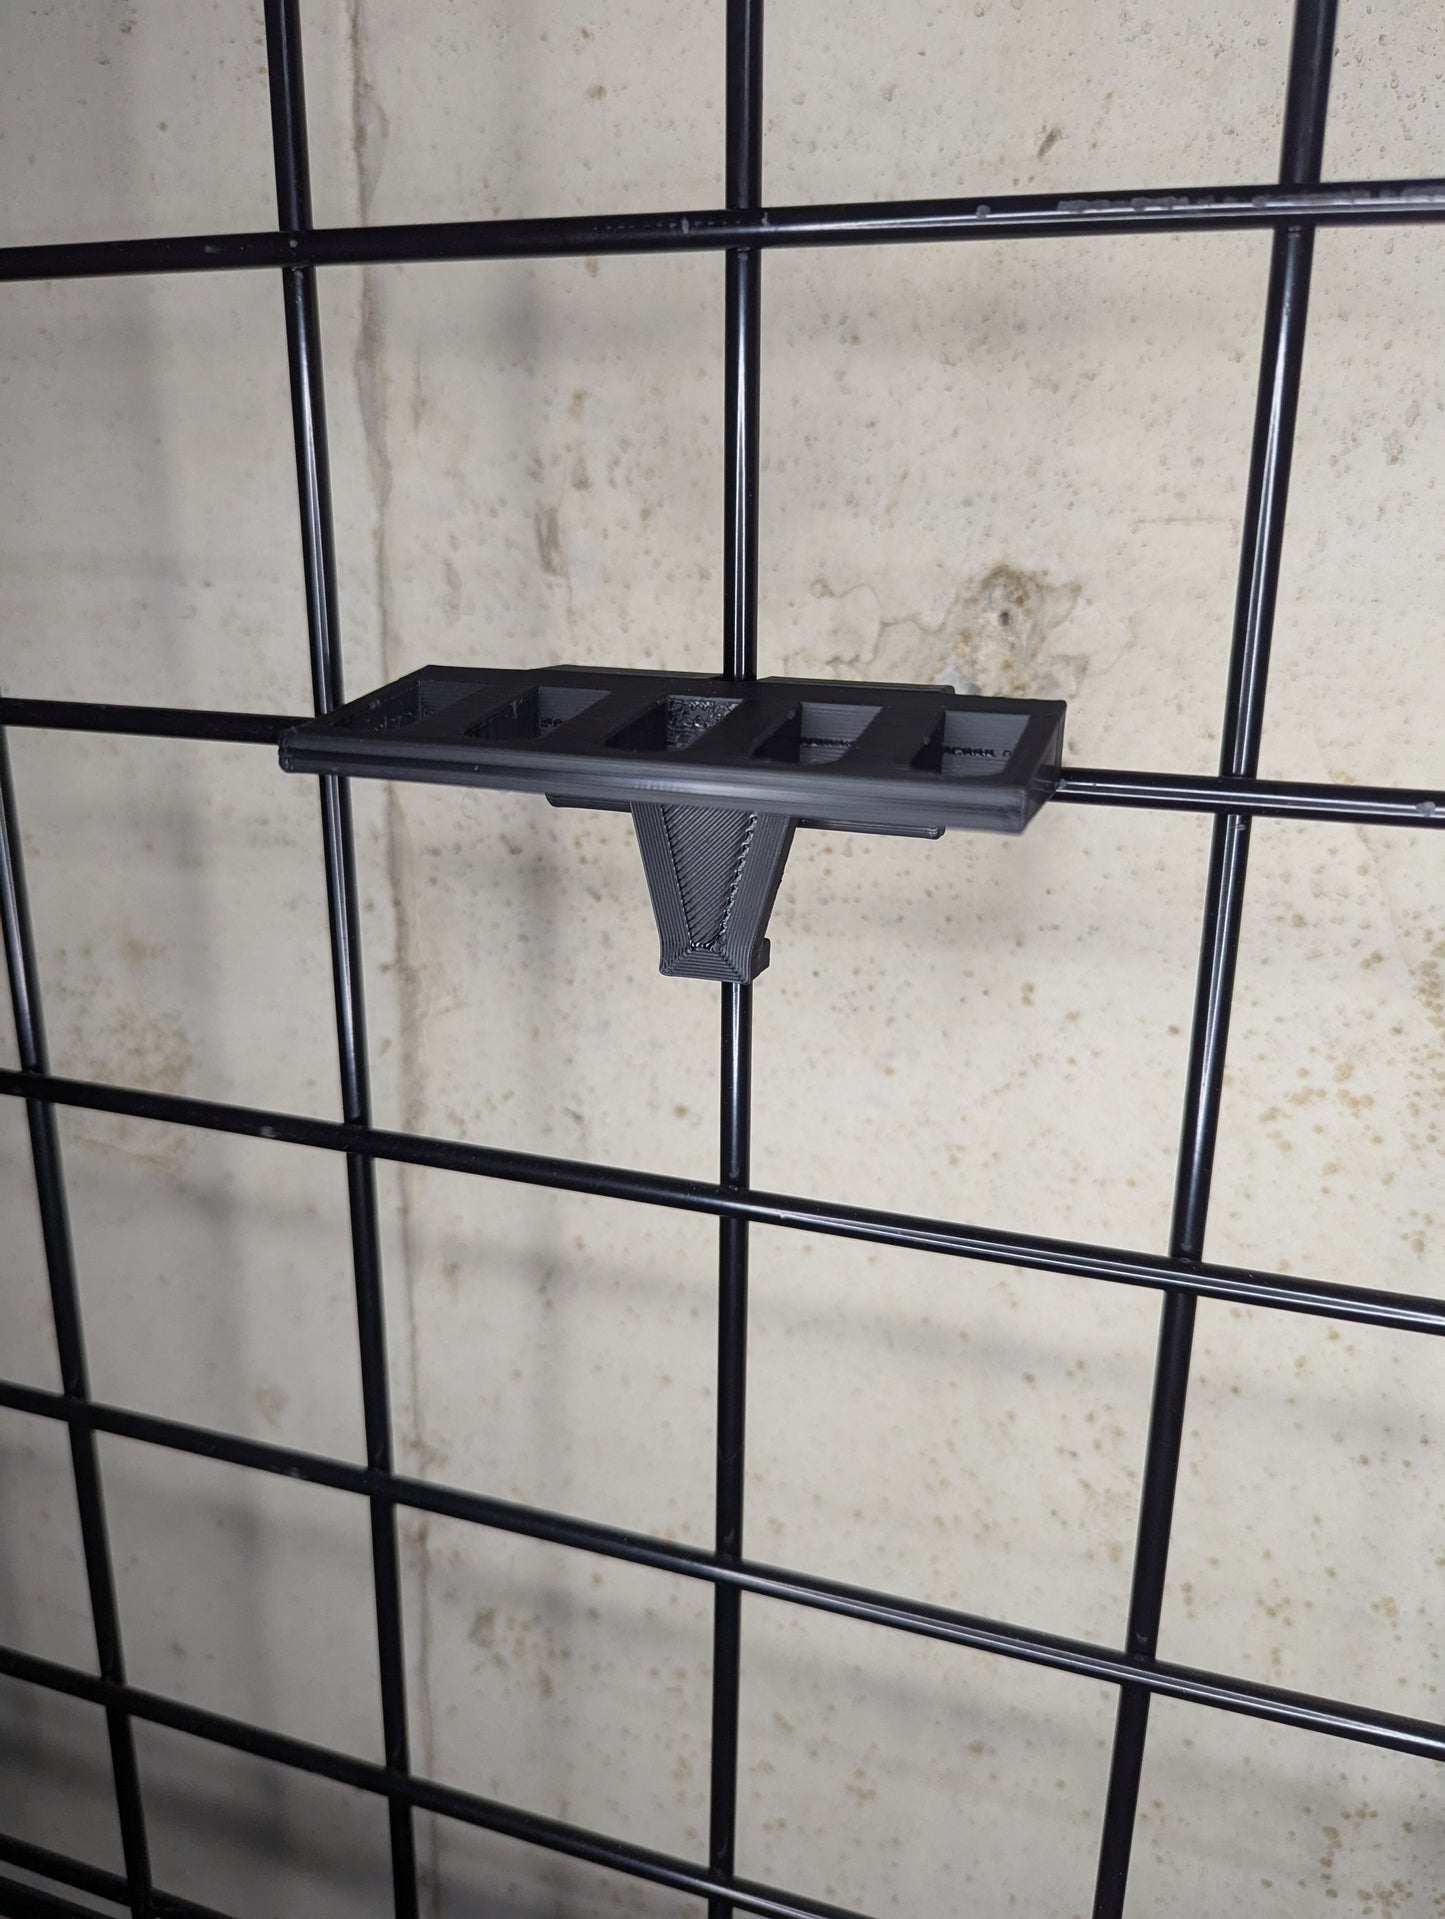 Mount for S&W Model 41 Mags - Gridwall | Magazine Holder Storage Rack